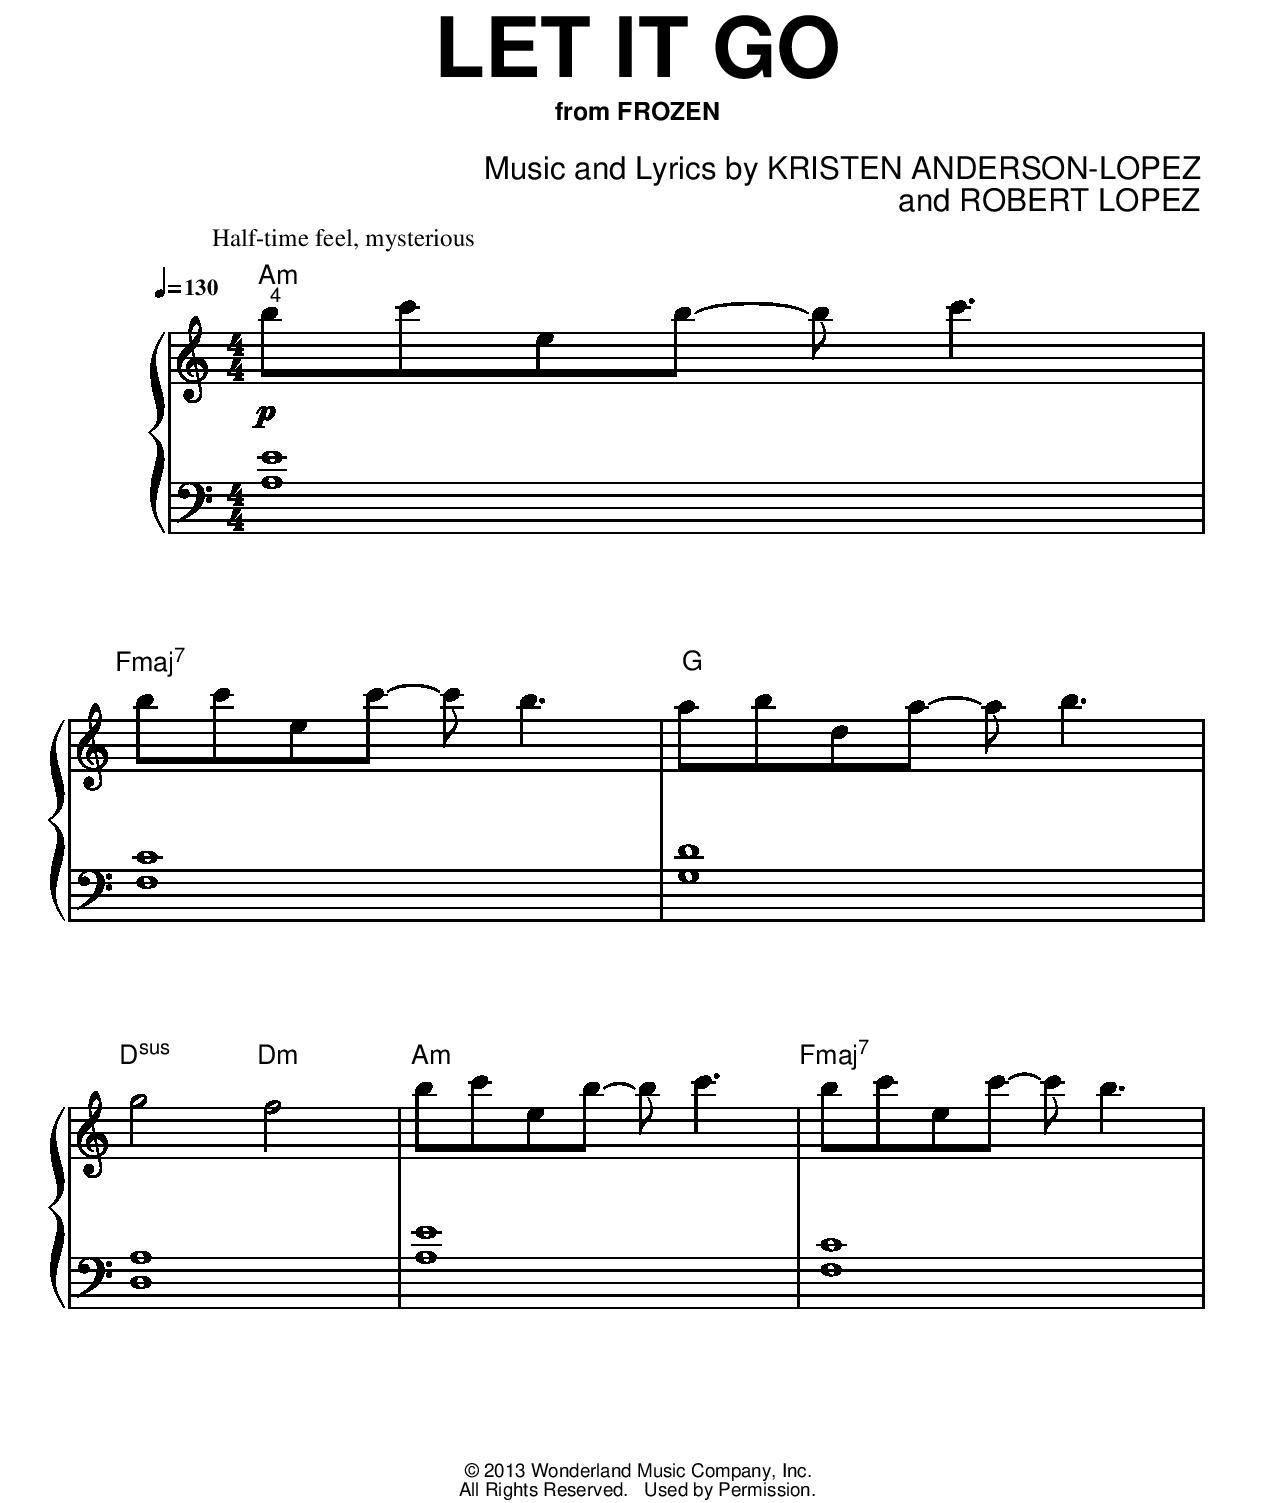 Copy of simplified sheet music for